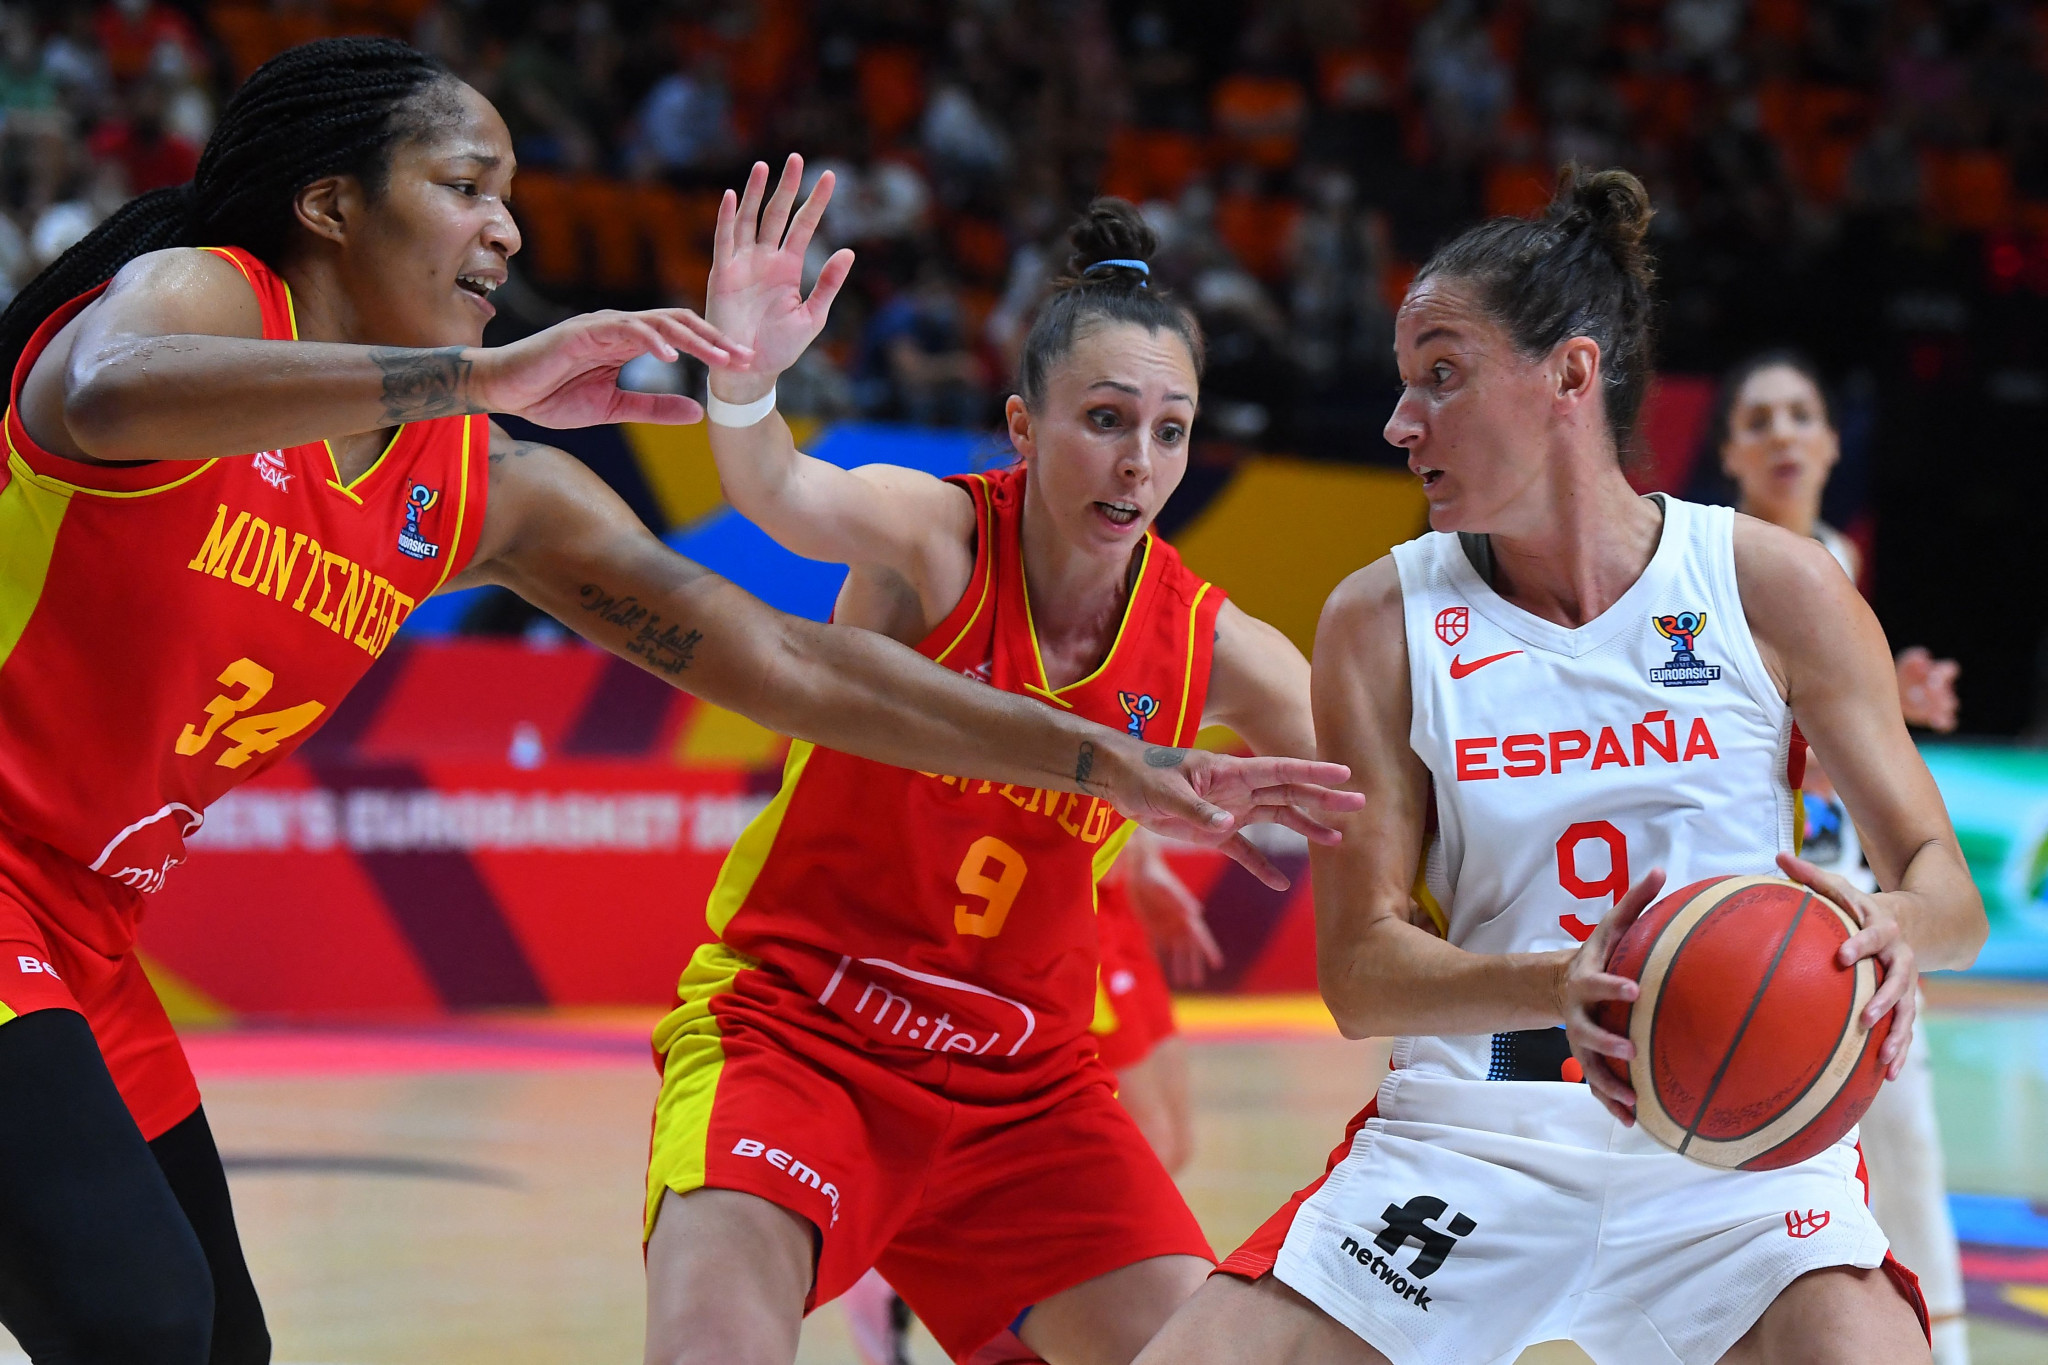 Co-hosts Spain reached the quarter-finals of the FIBA Women's EuroBasket tournament after beating Montenegro in the knockout round ©Getty Images